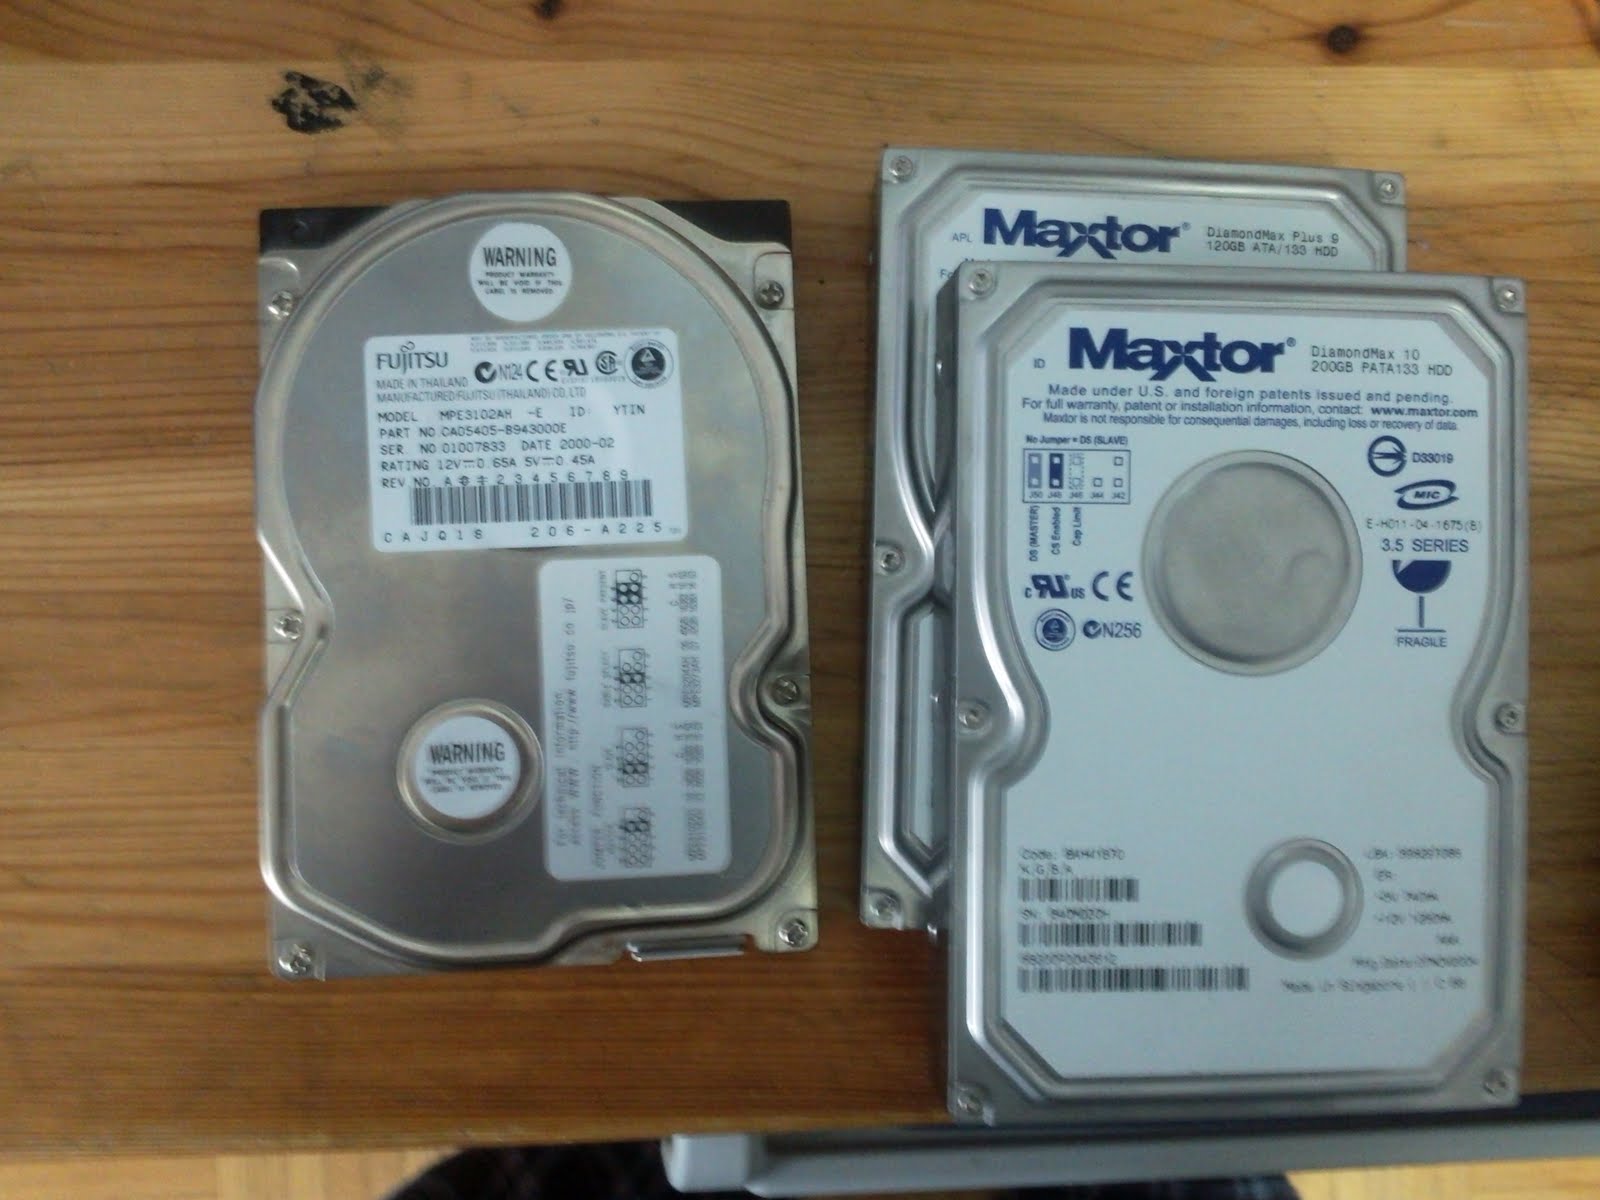 A stack of hard drives